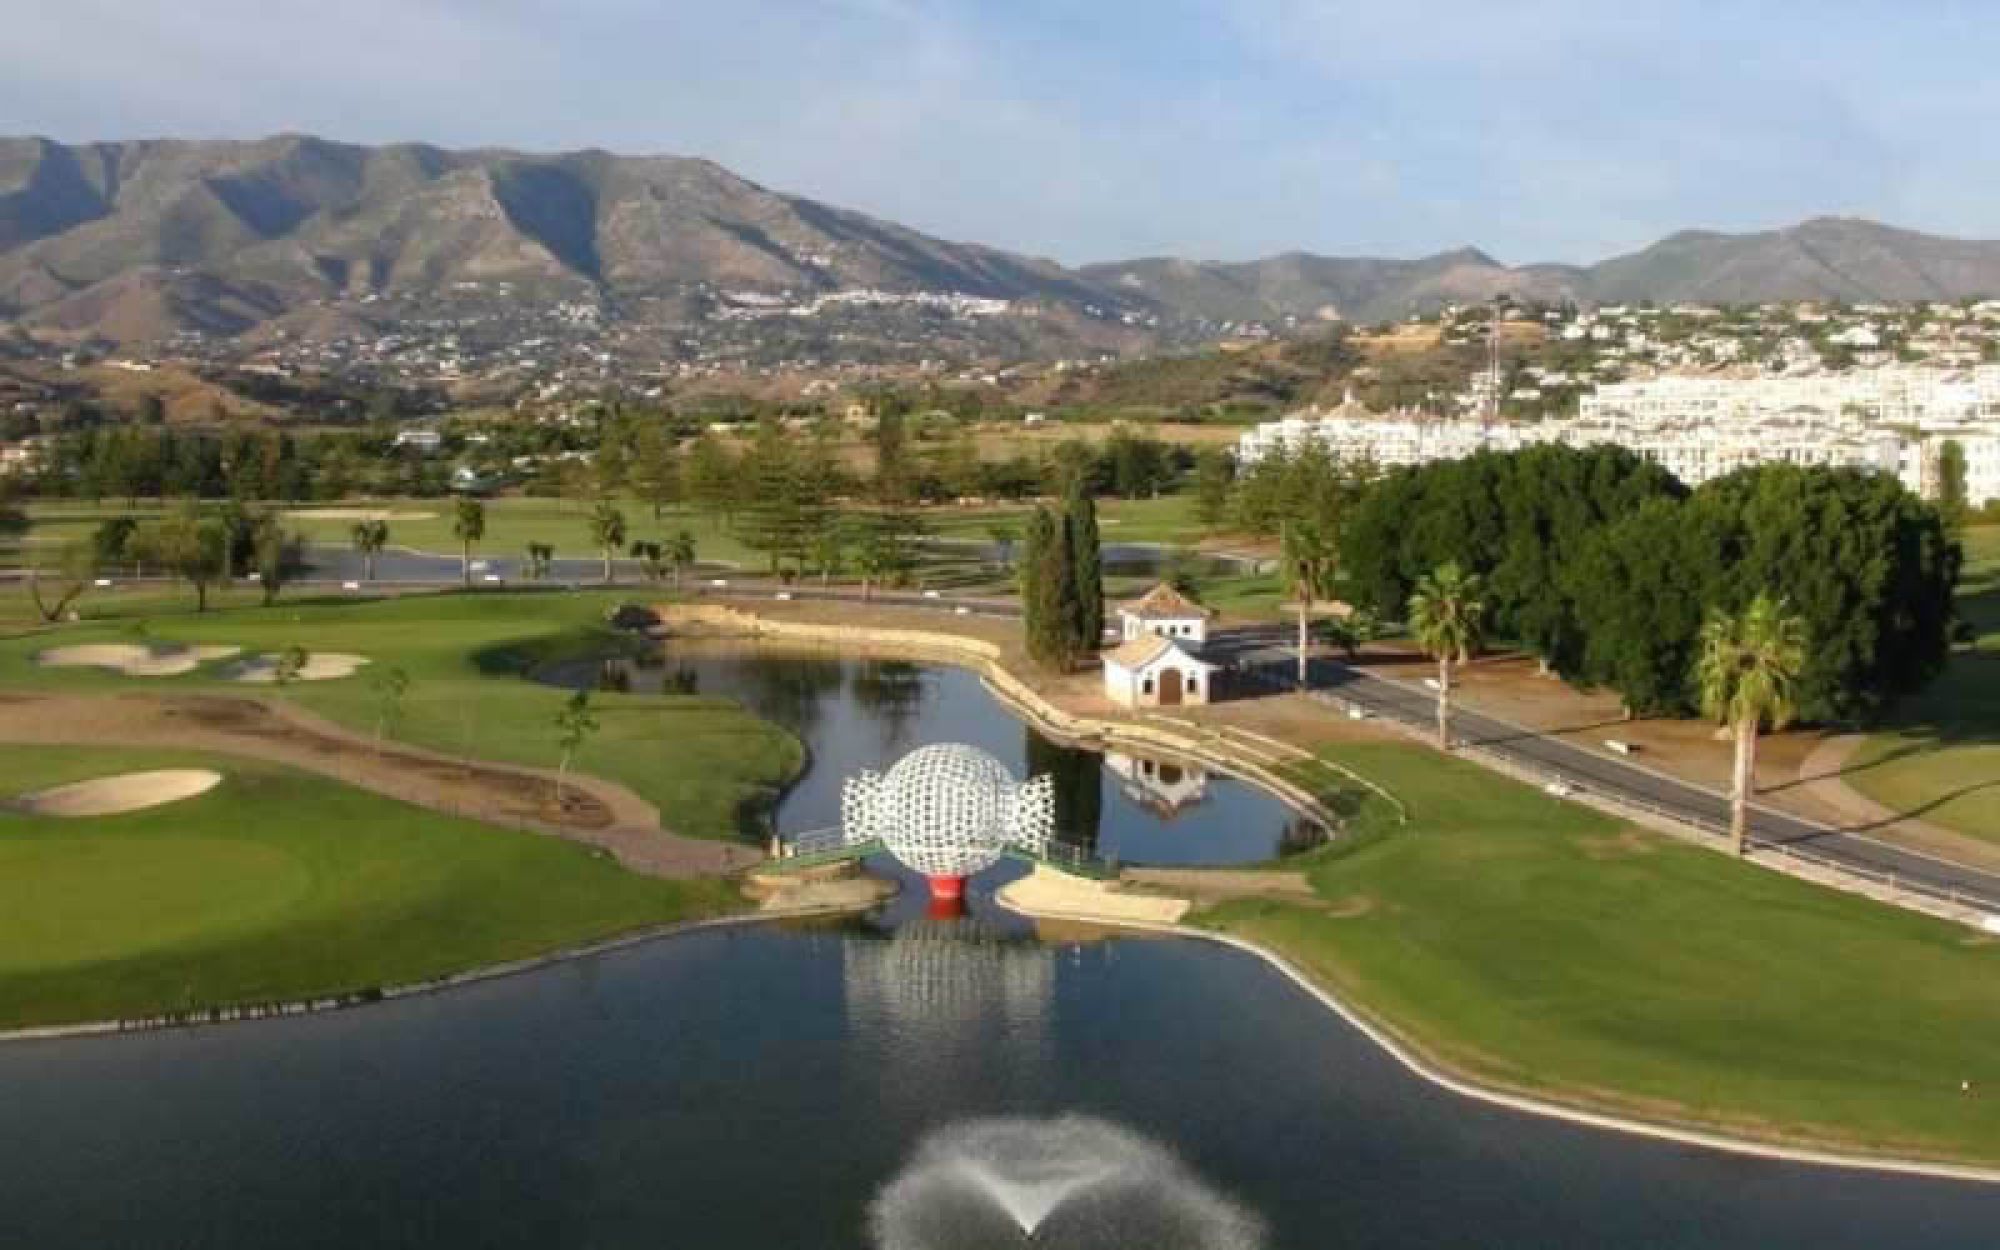 The Mijas Golf Club - Los Lagos's lovely golf course in incredible Costa Del Sol.